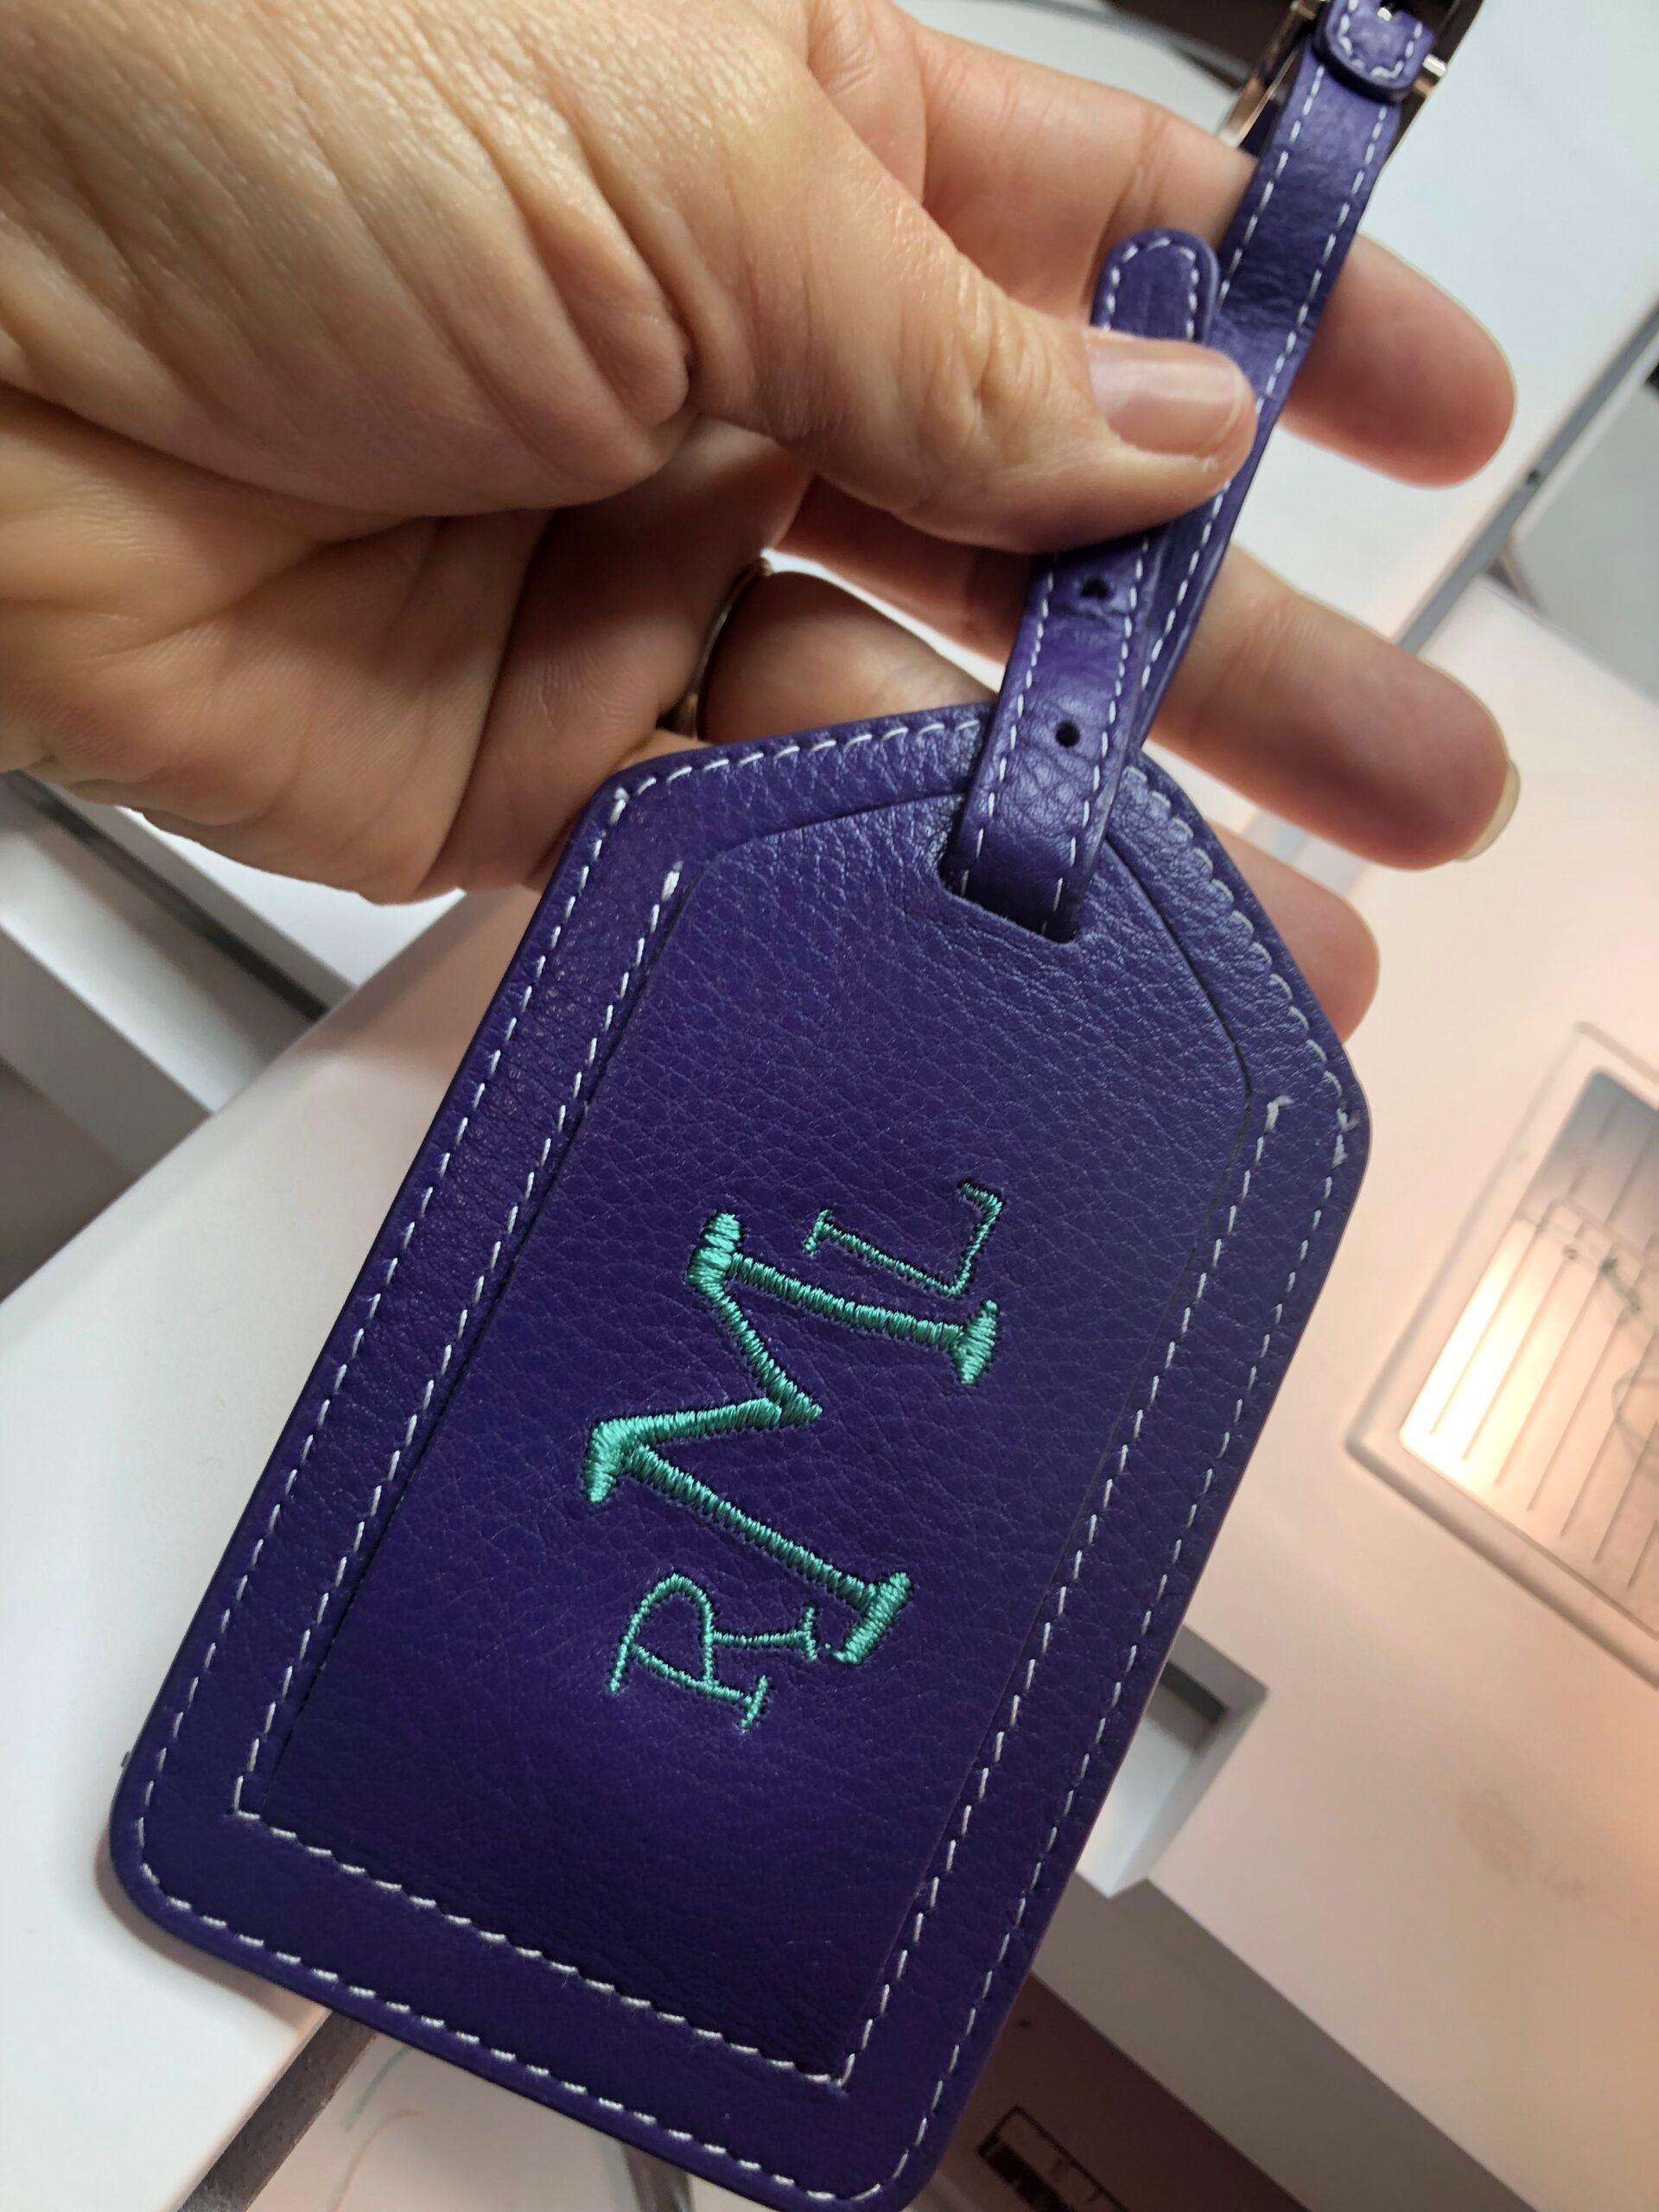 place buckle back on luggage tag